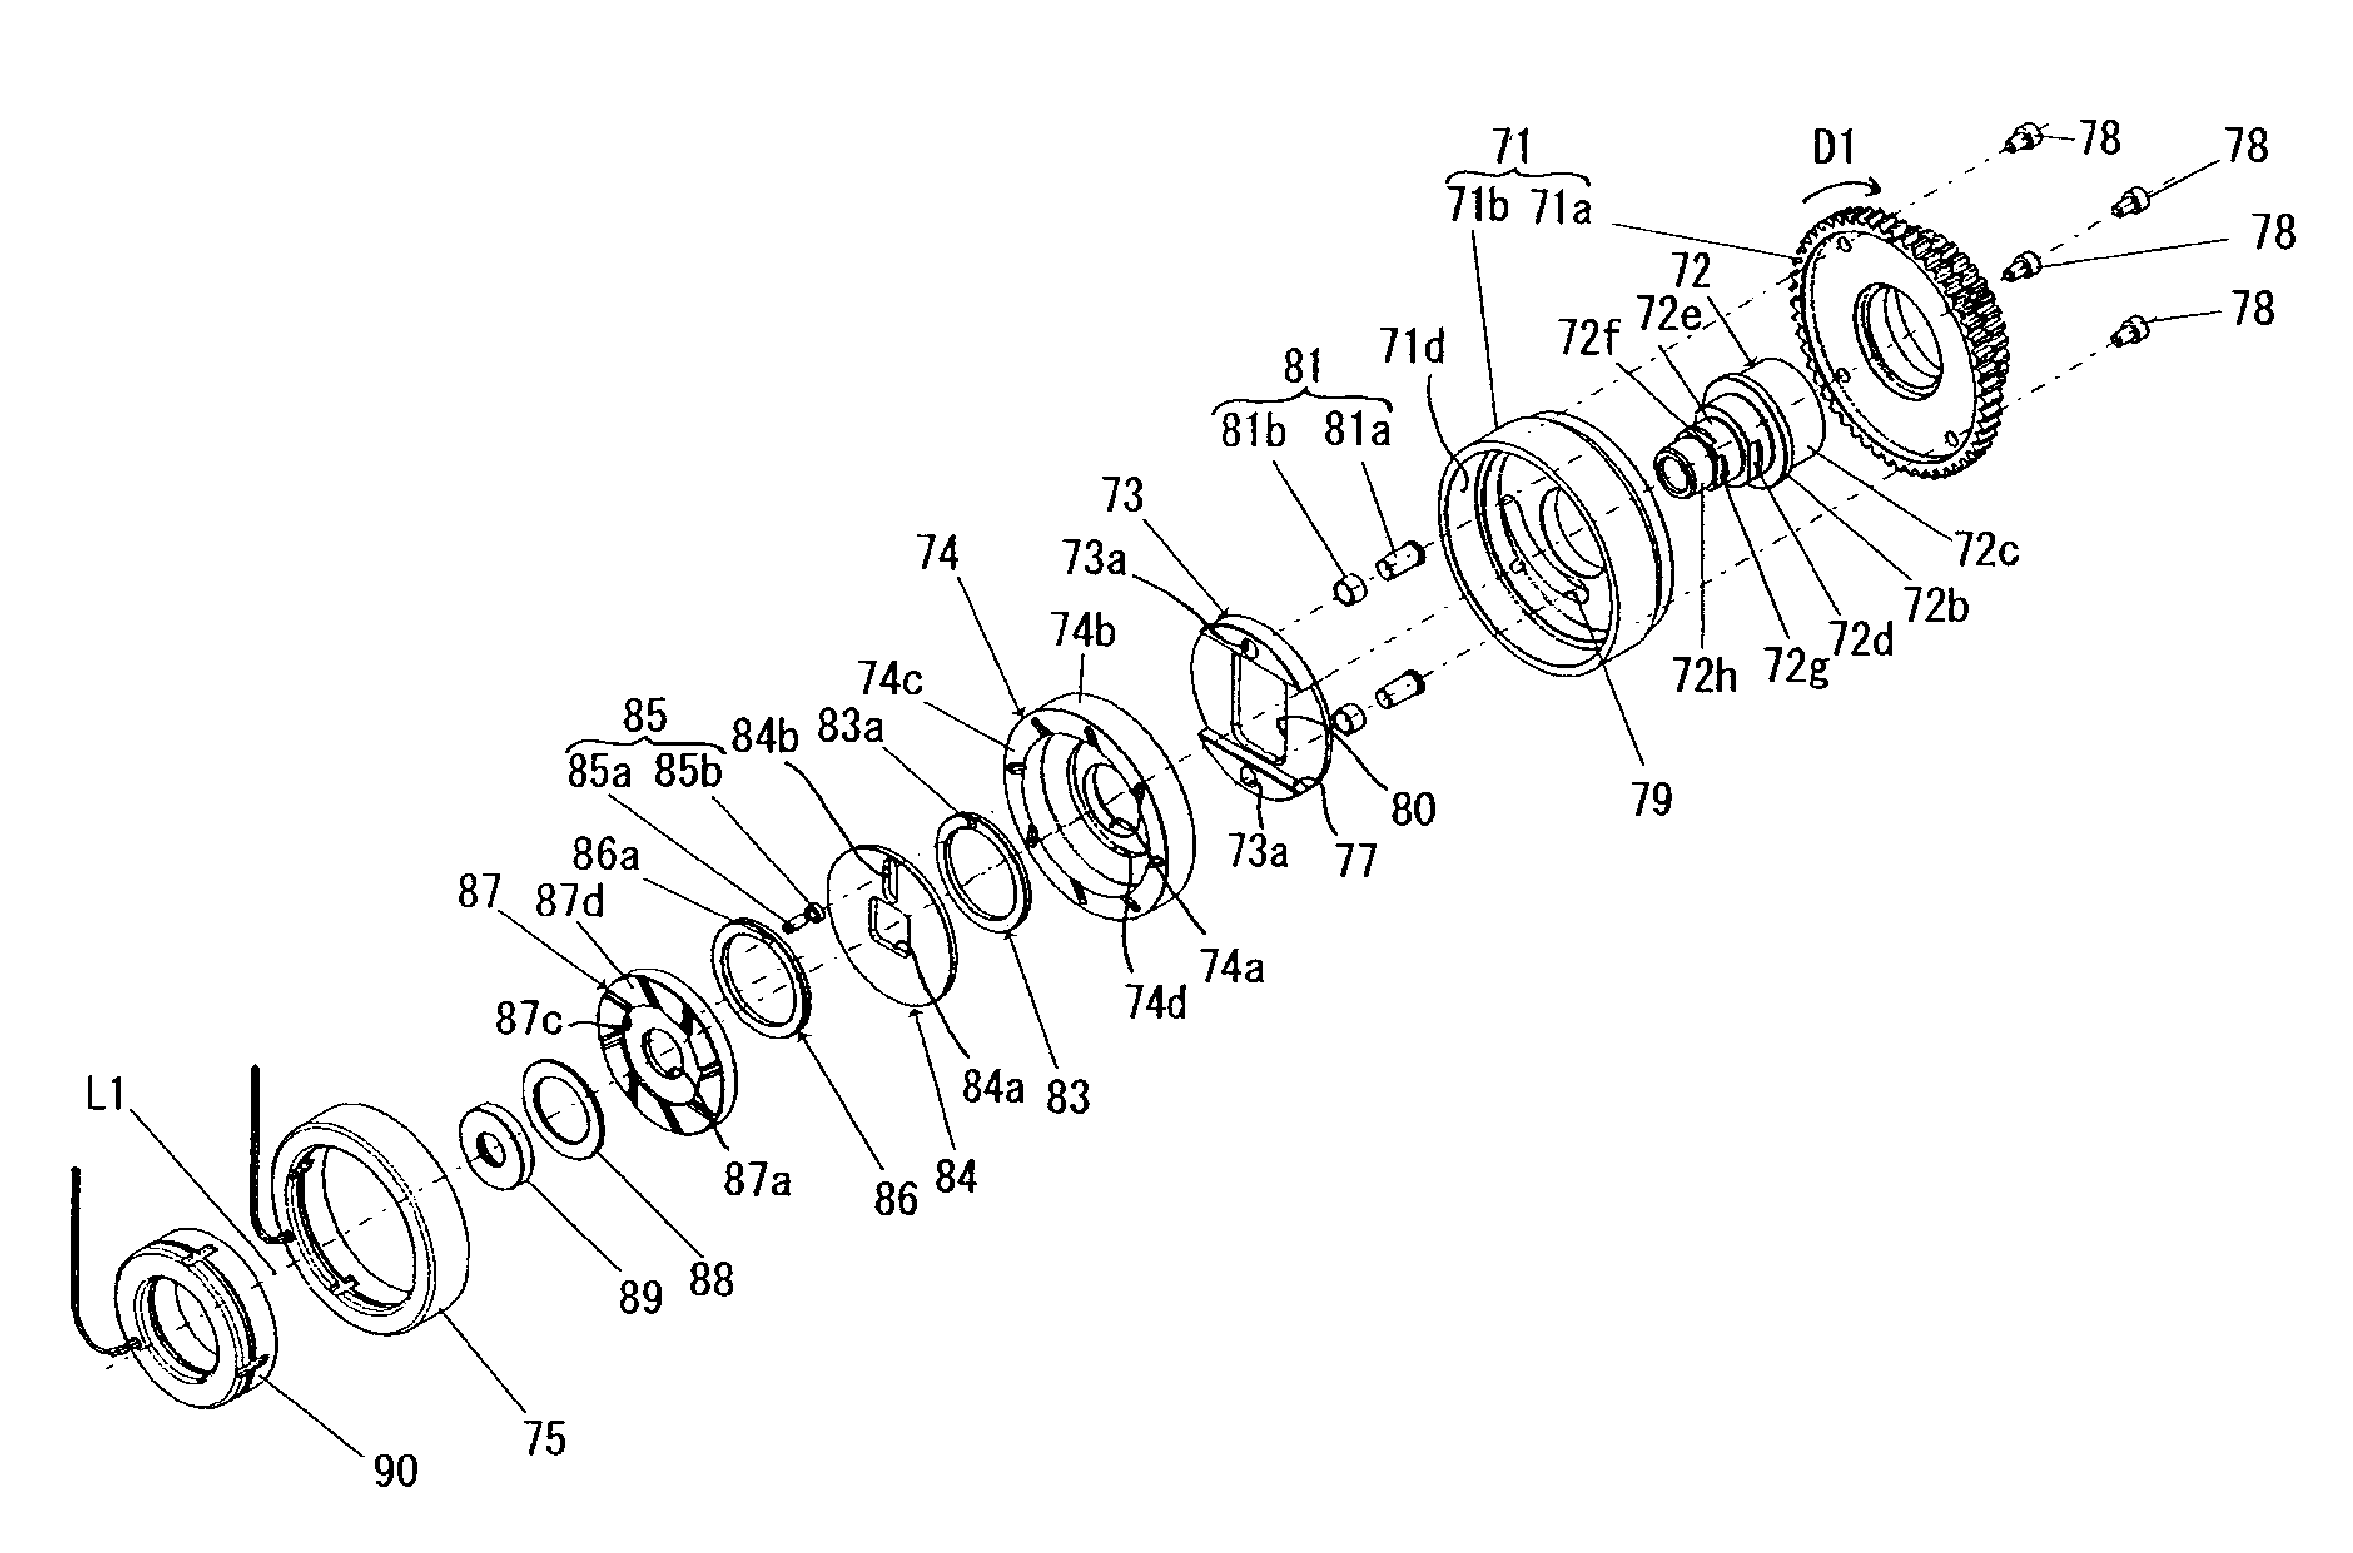 Cam shaft phase variable device in engine for automobile